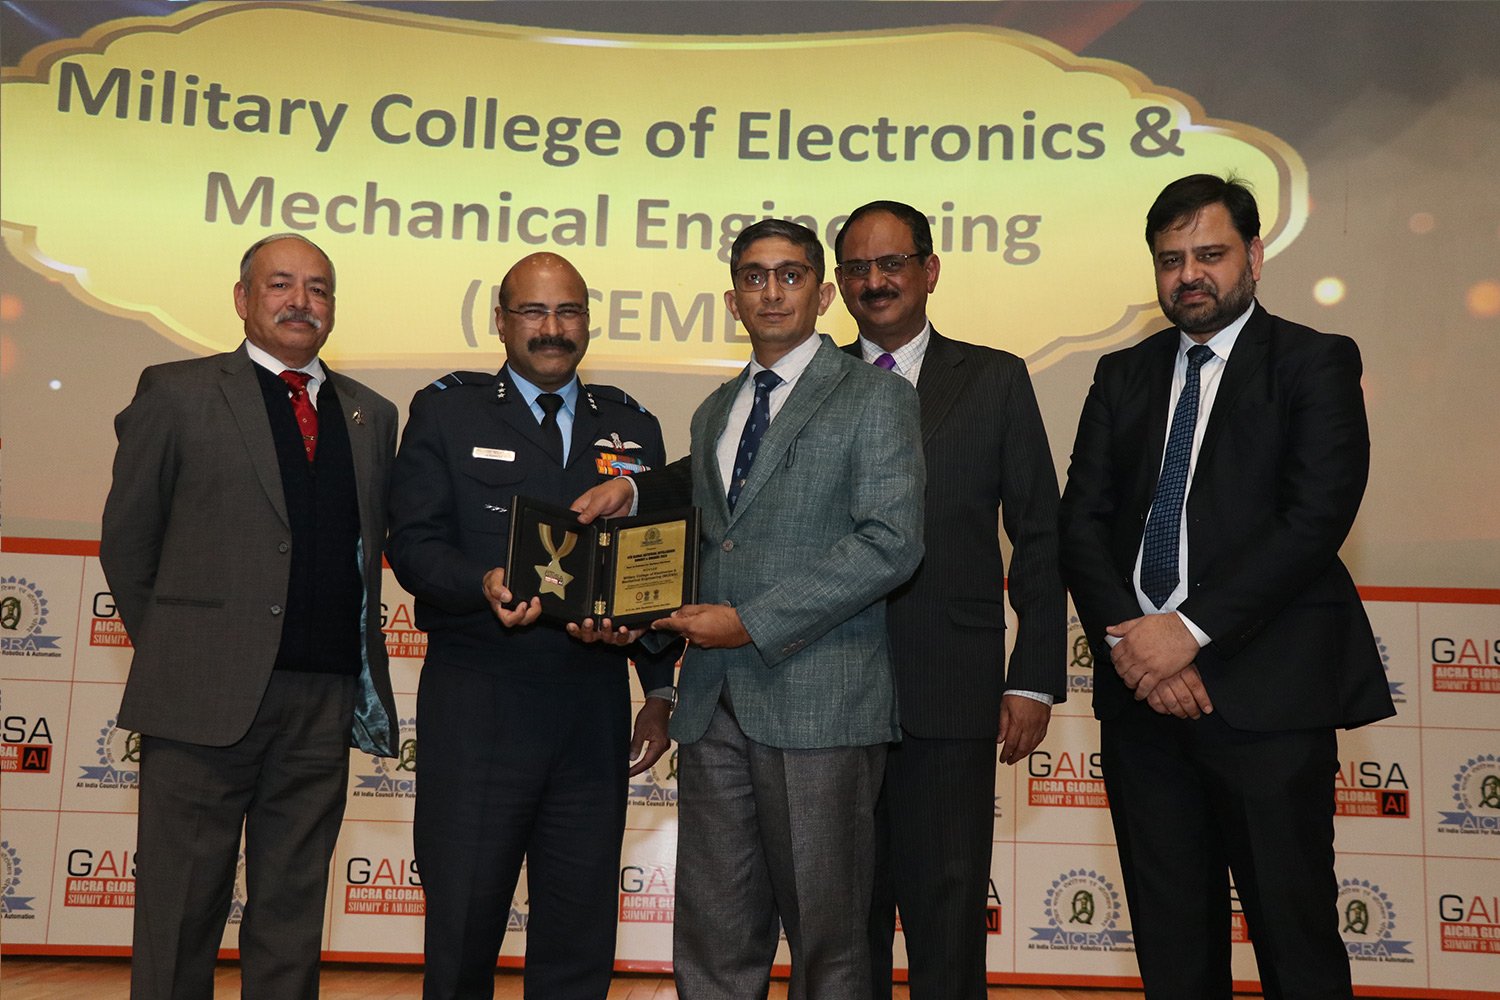 Military College of Electronics and Mechanical Engineering (MCEME)